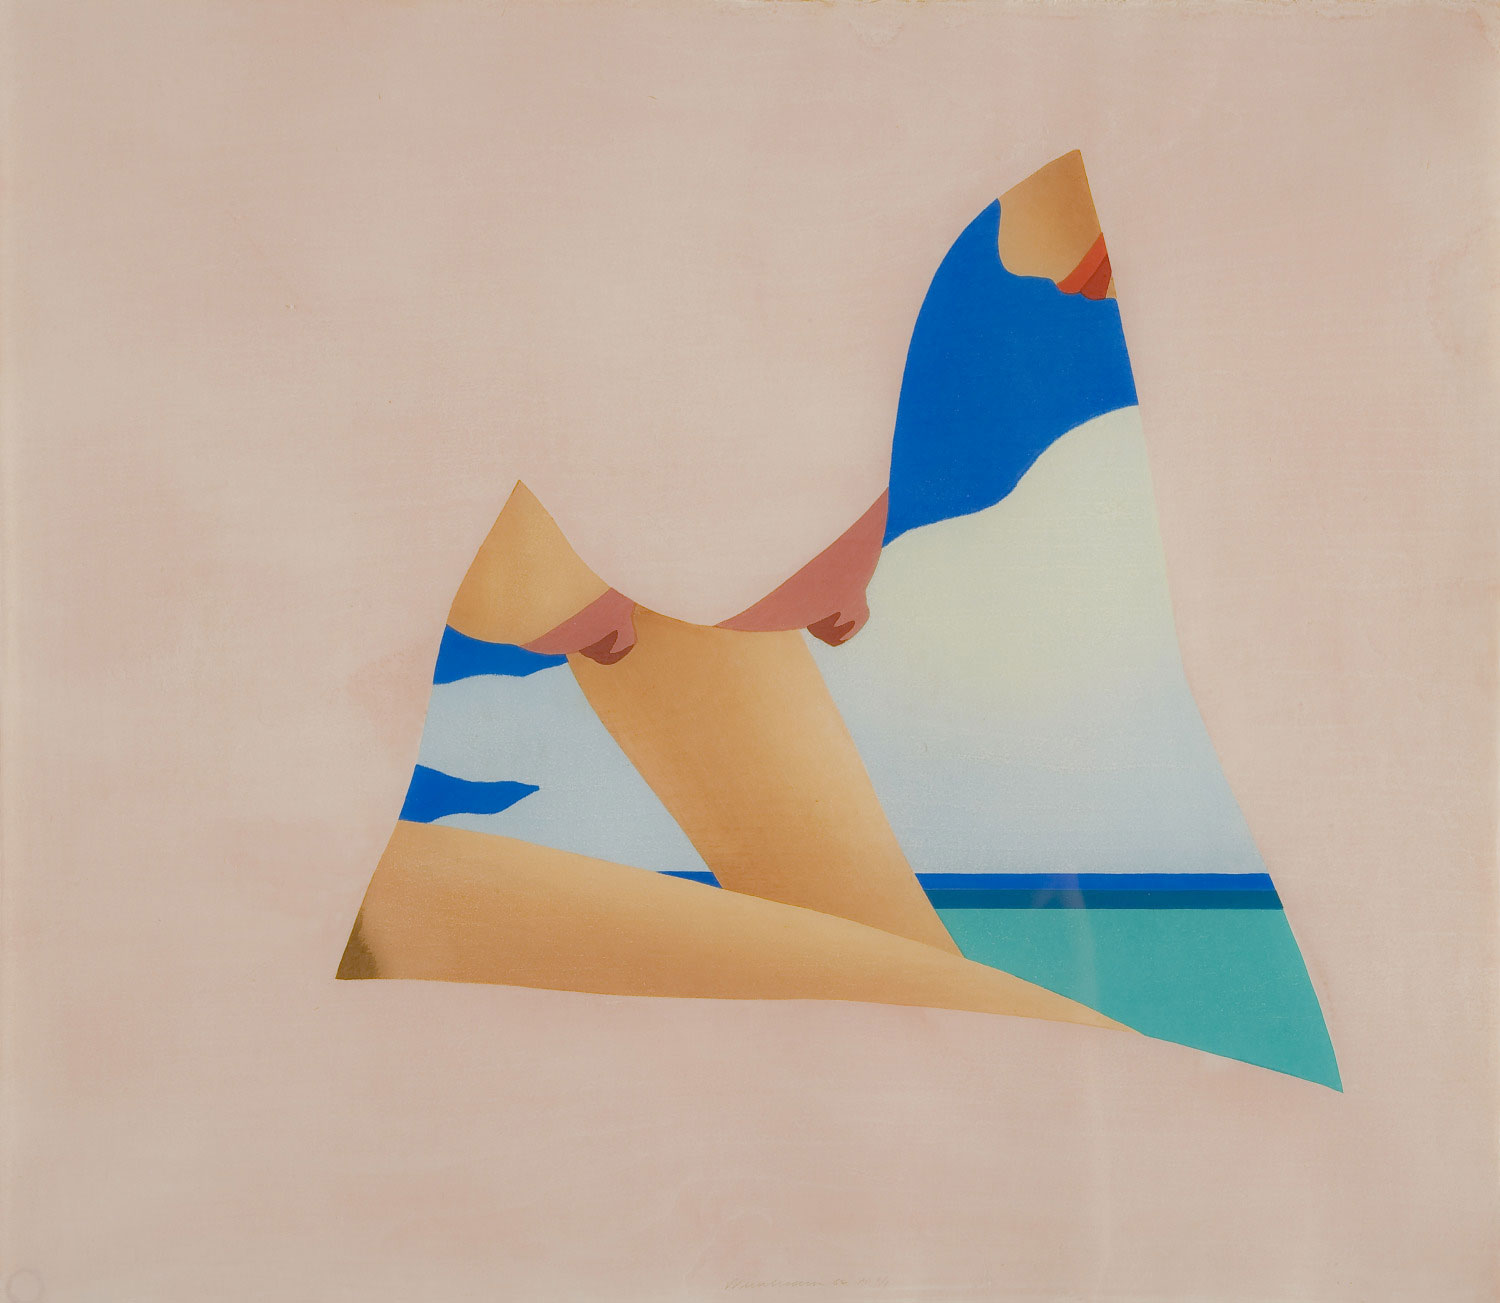 Tom Wesselmann, Seascape Dropout (Abandono del paisaje marino), 1982. Color woodcut. Gift of Trudy and Steven Wiesenberger in honor of the Museum's 50th Anniversary. © 2020 Artists Rights Society (ARS), NY.